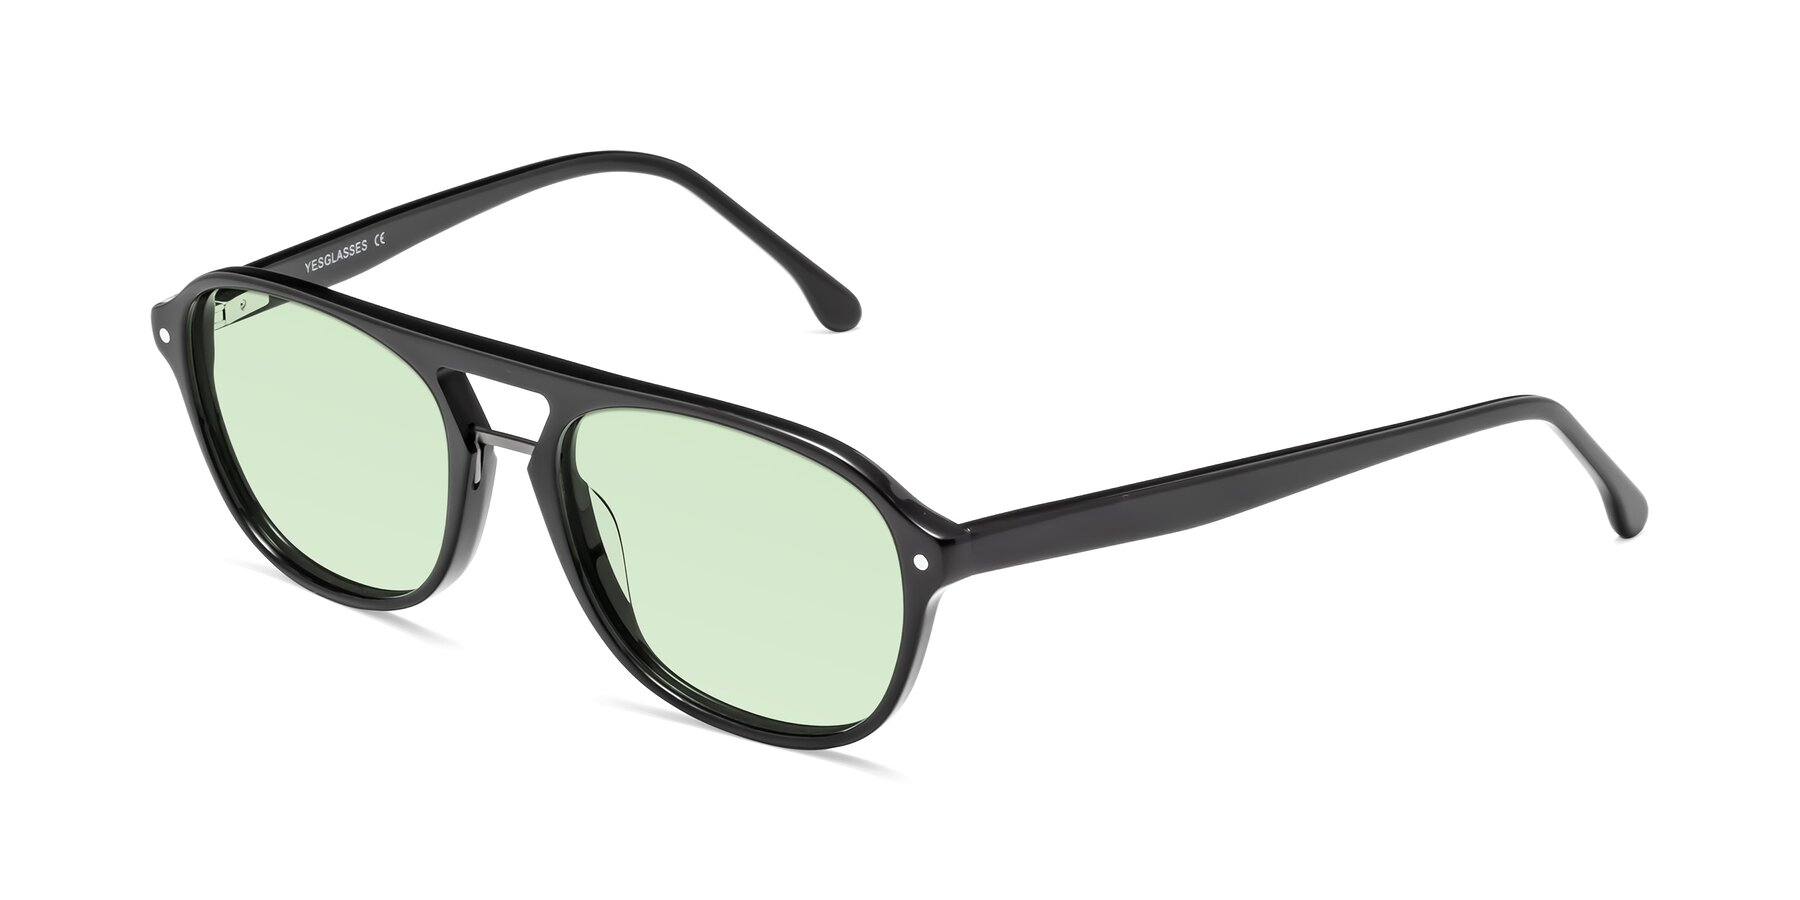 Angle of 17416 in Black with Light Green Tinted Lenses